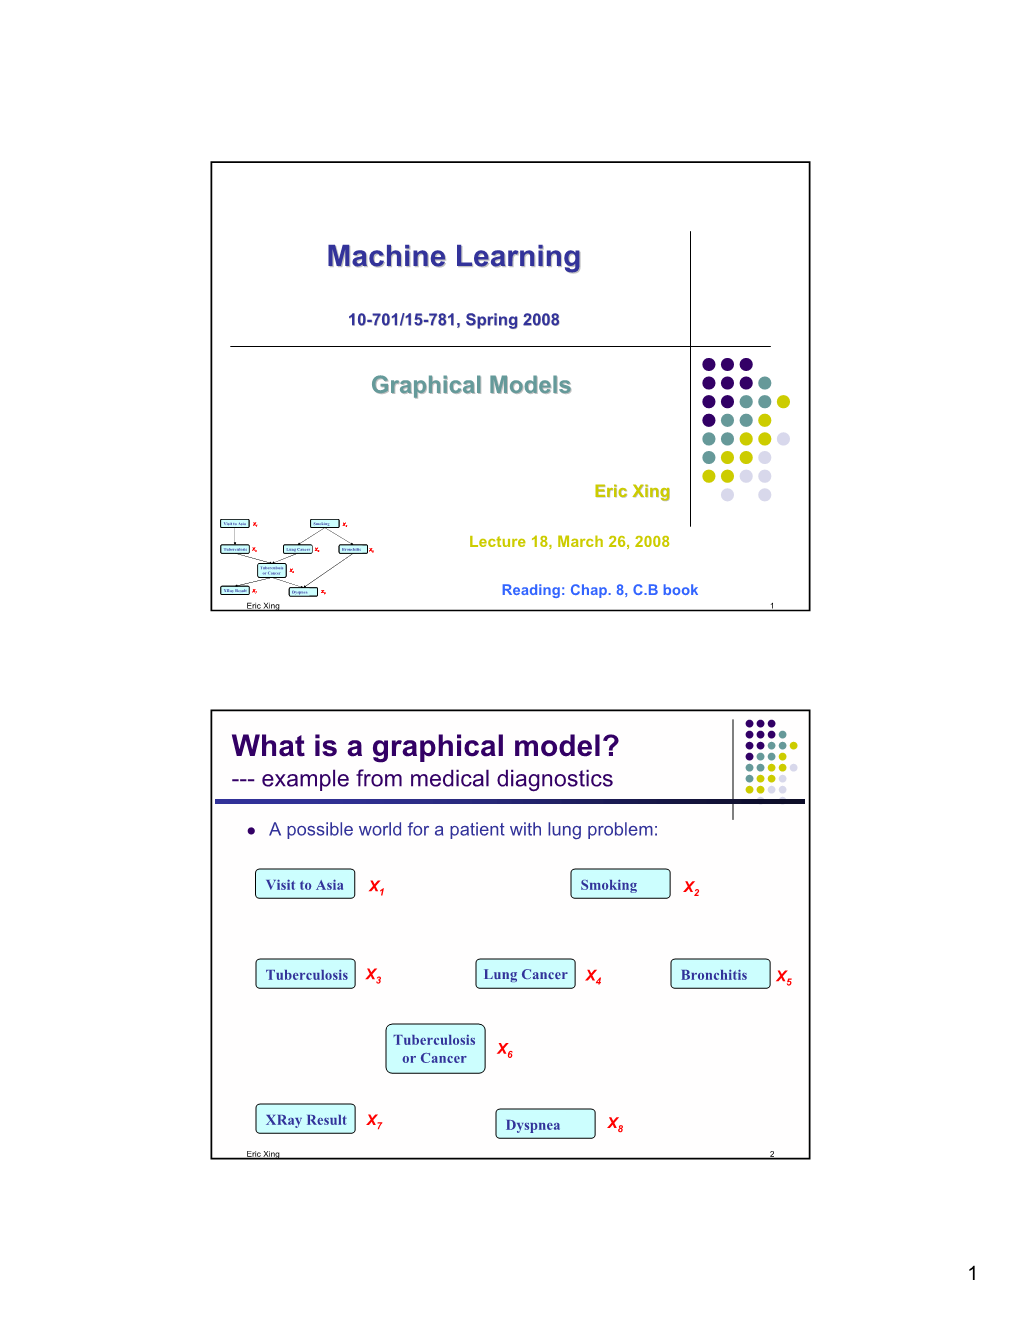 Machine Learning What Is a Graphical Model?